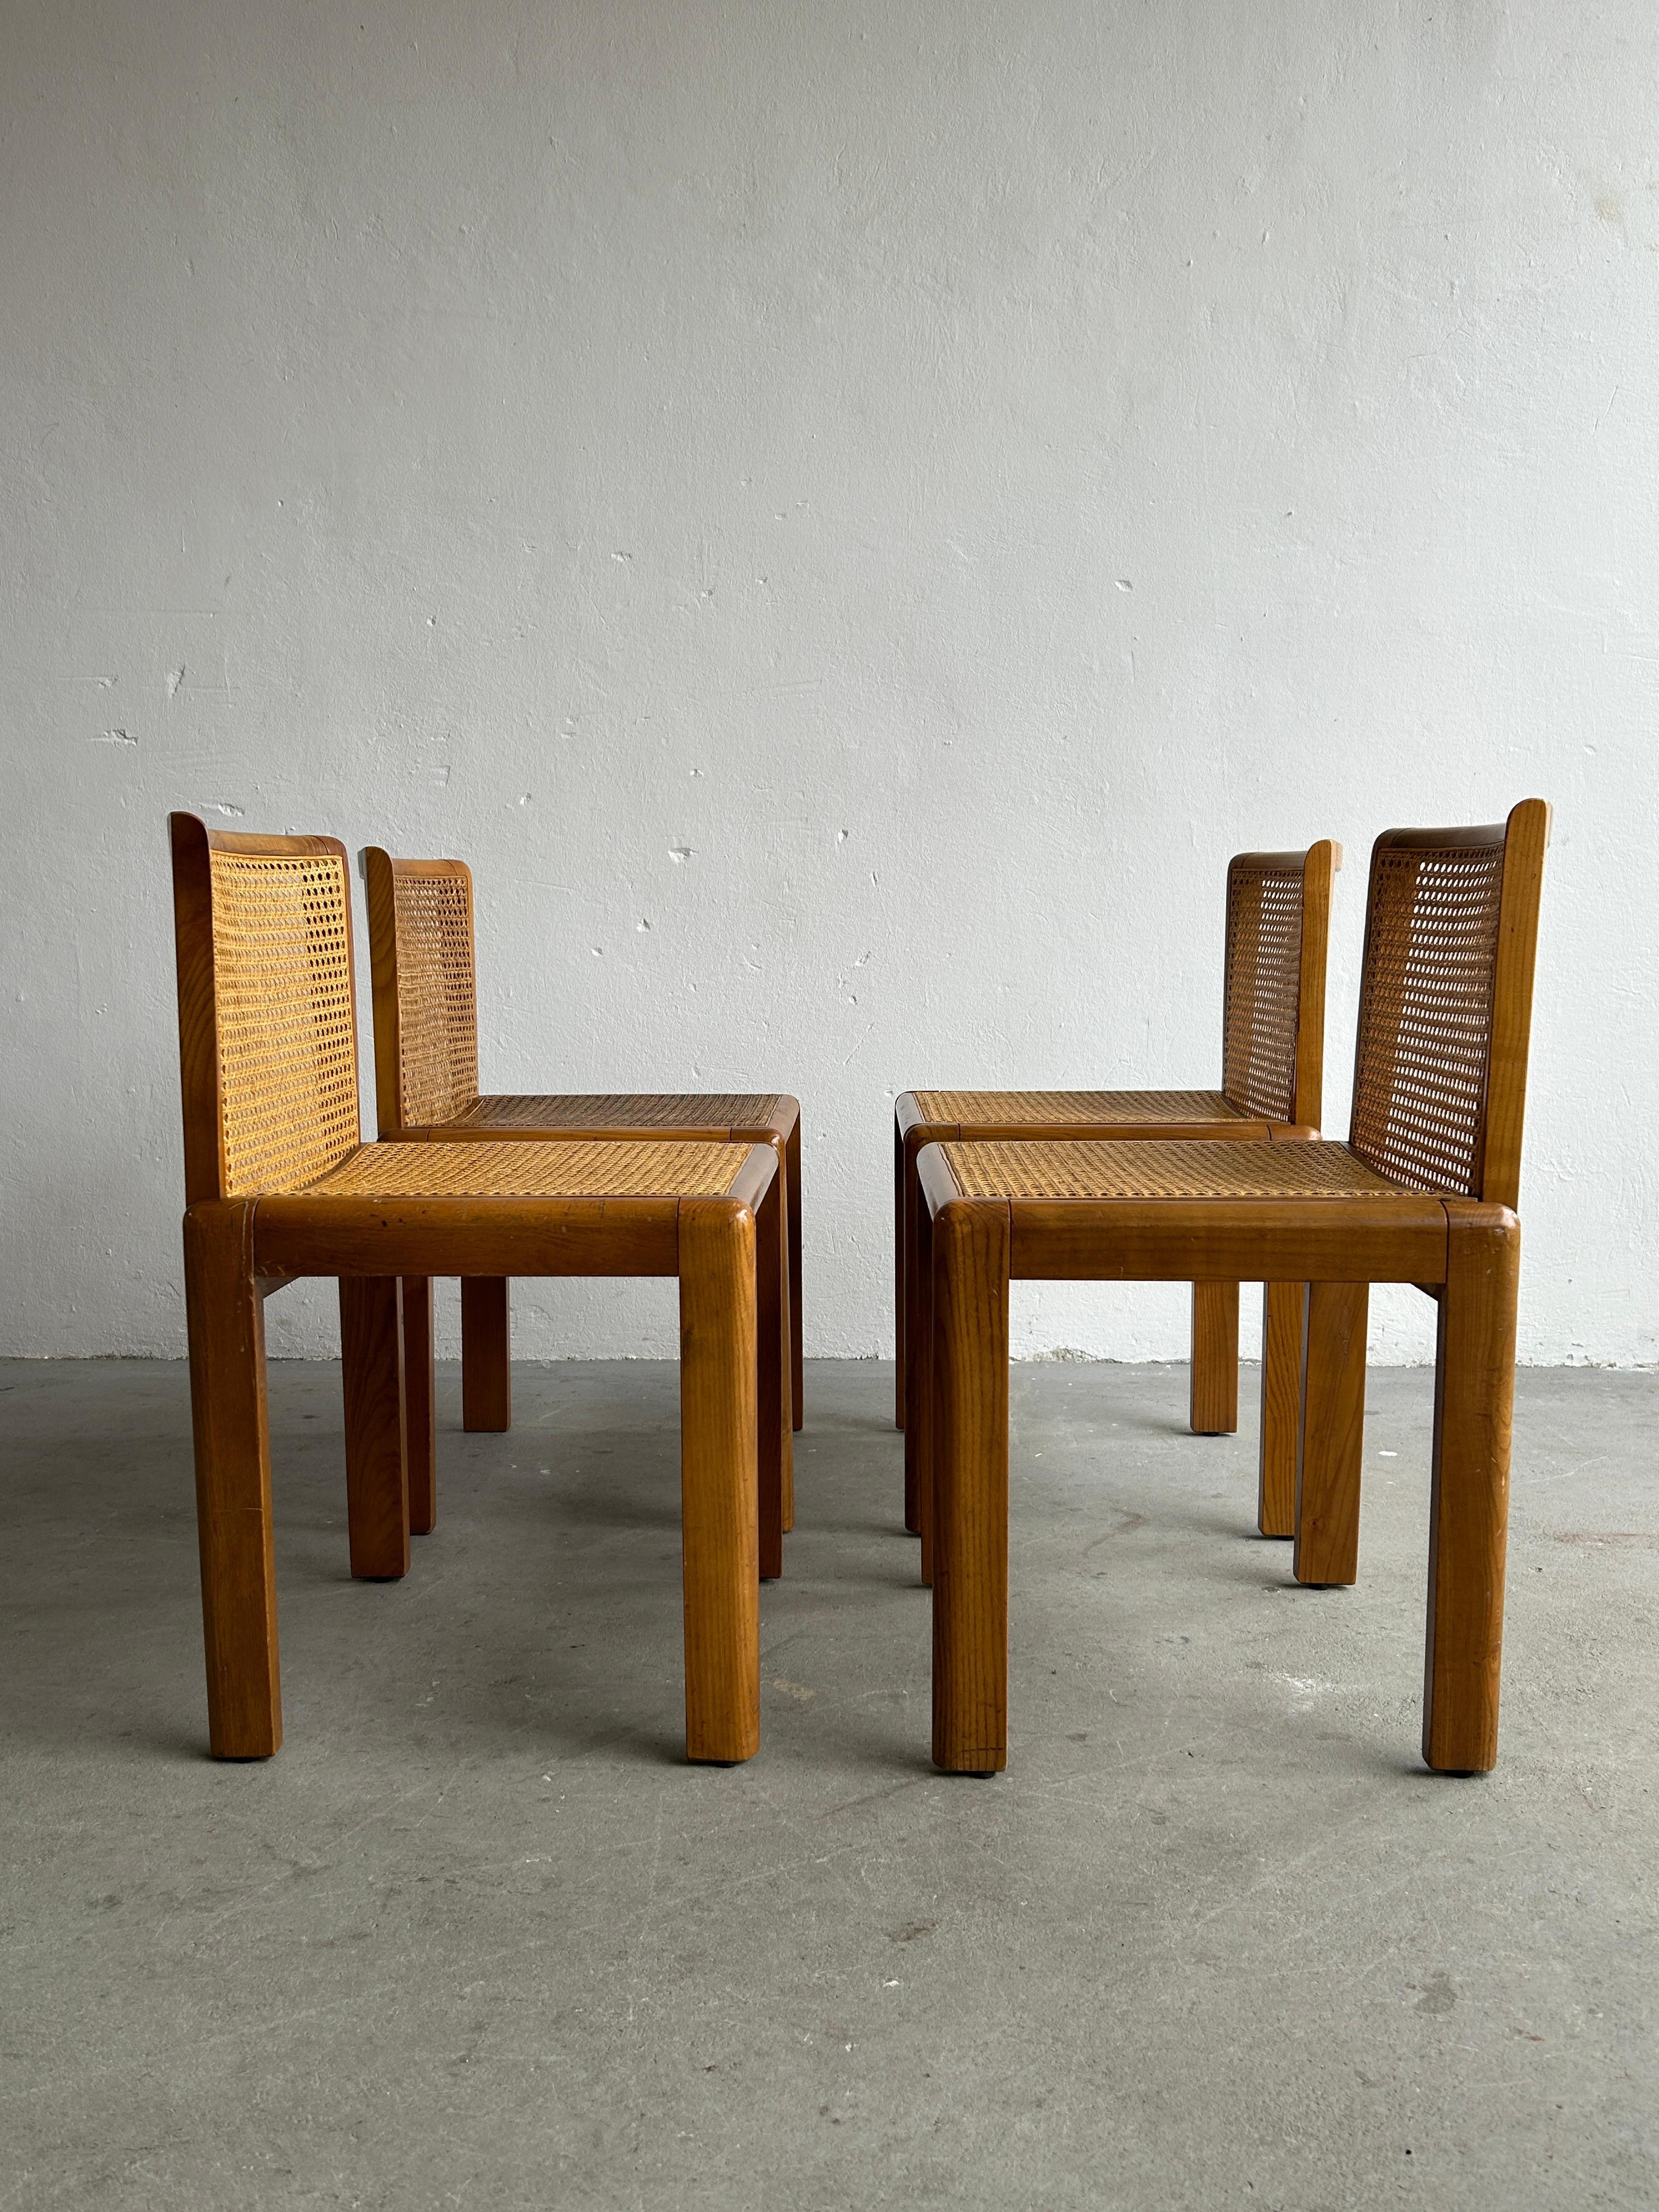 Vintage Italian 1970s Mid-Century Modern Wooden Dining Chairs in Oak and Cane 2